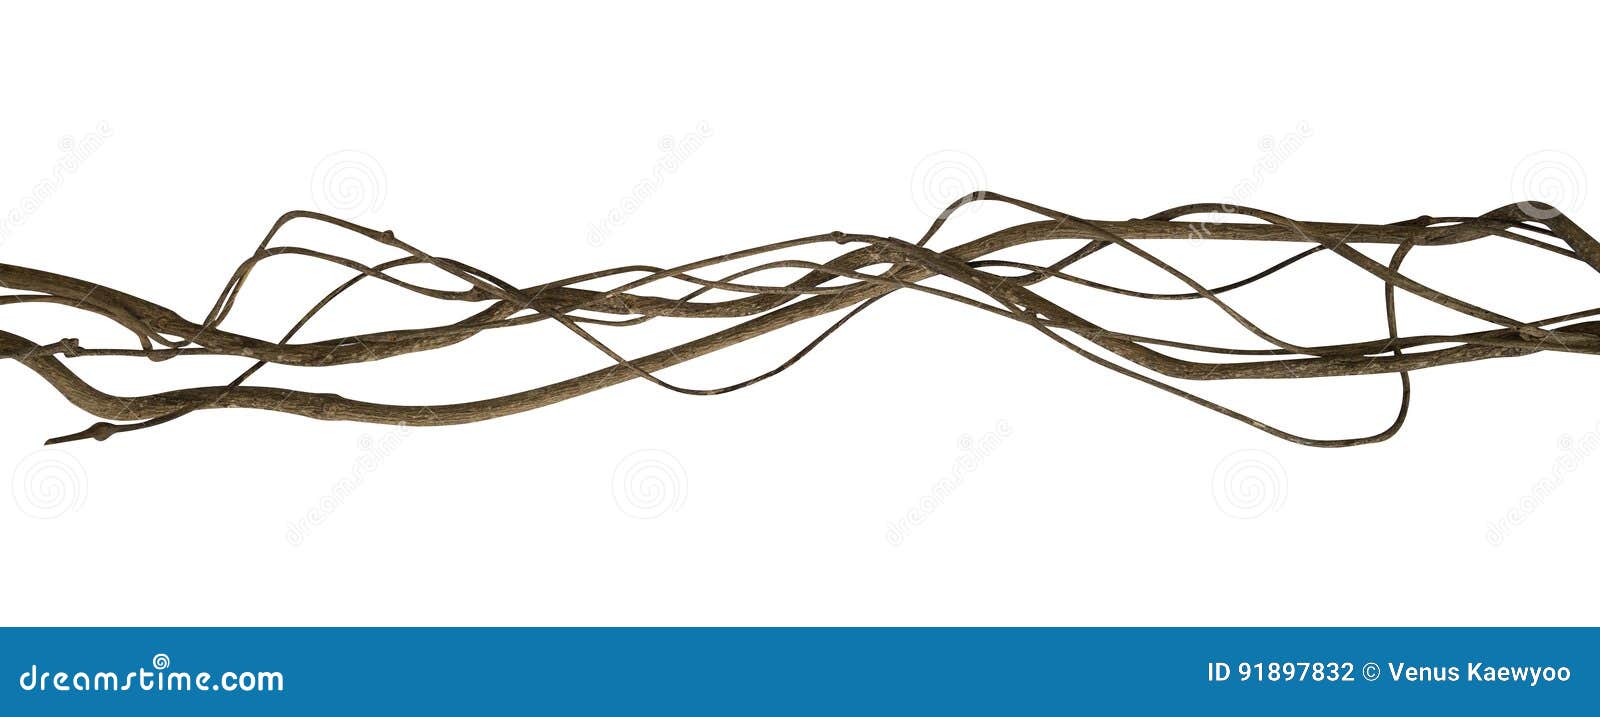 twisted wild liana jungle vine  on white background, clipping path included